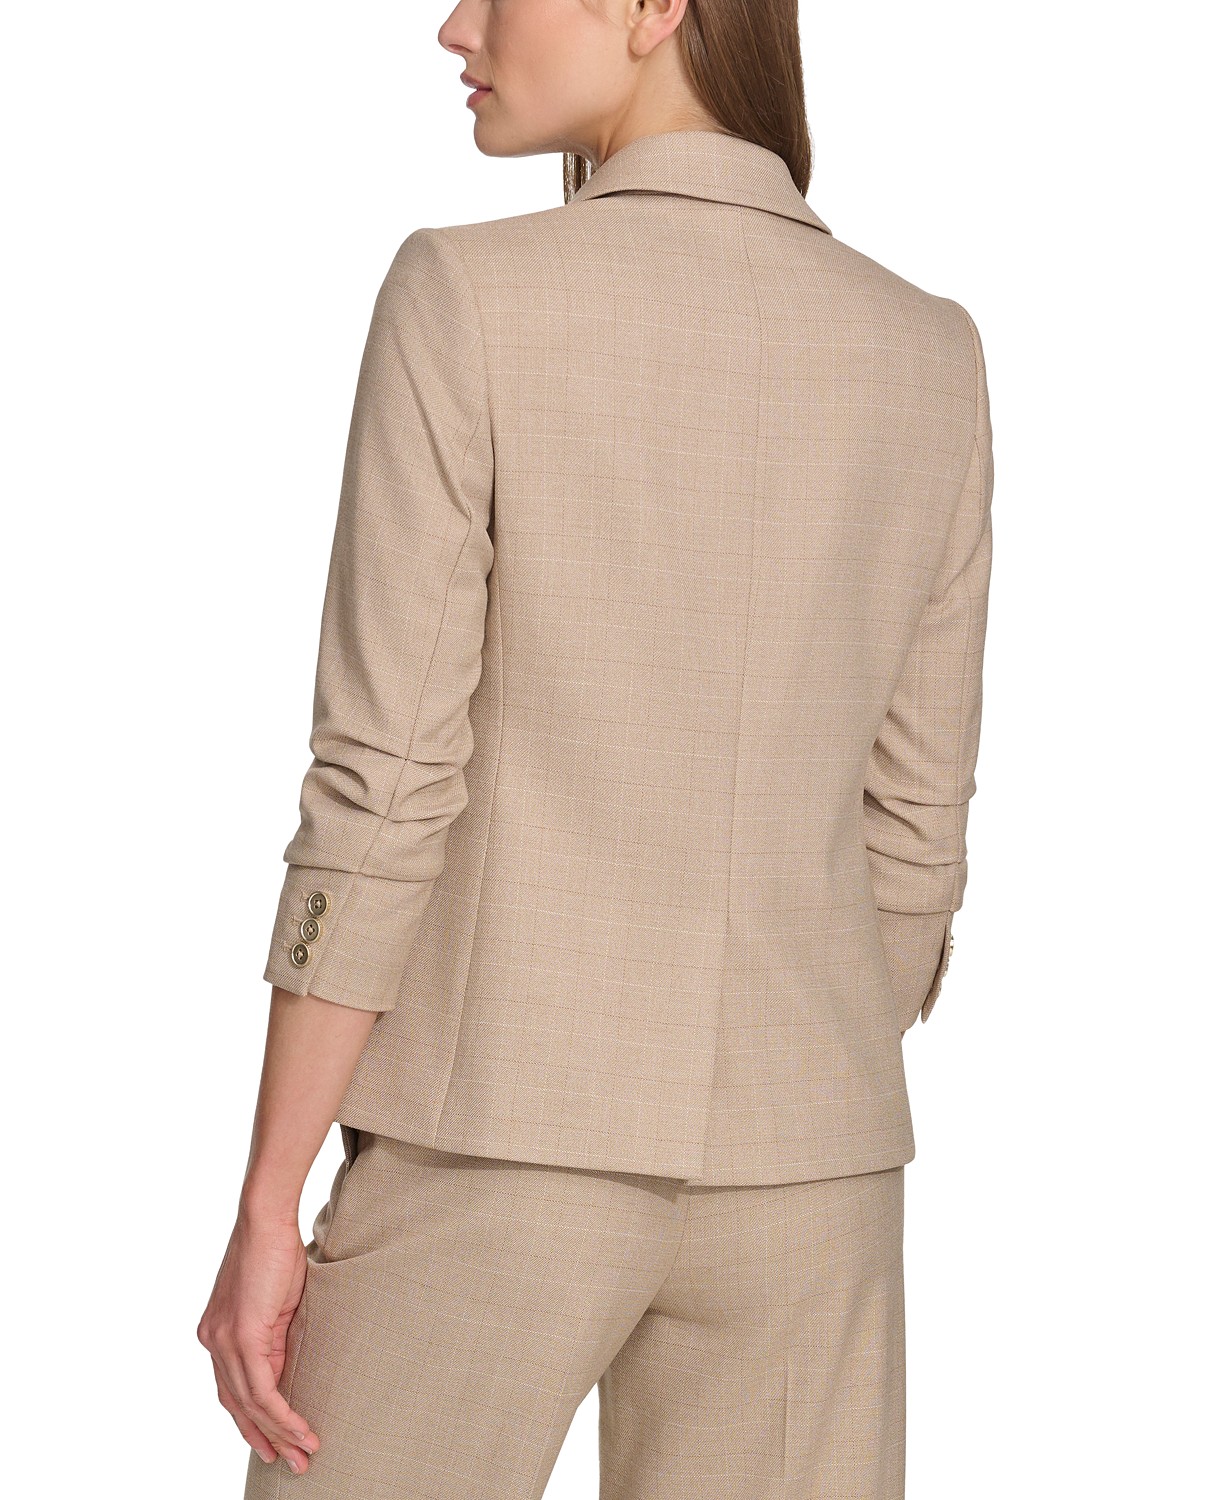 DKNY Petite Madison Notched-Collar Ruched-Sleeve Jacket